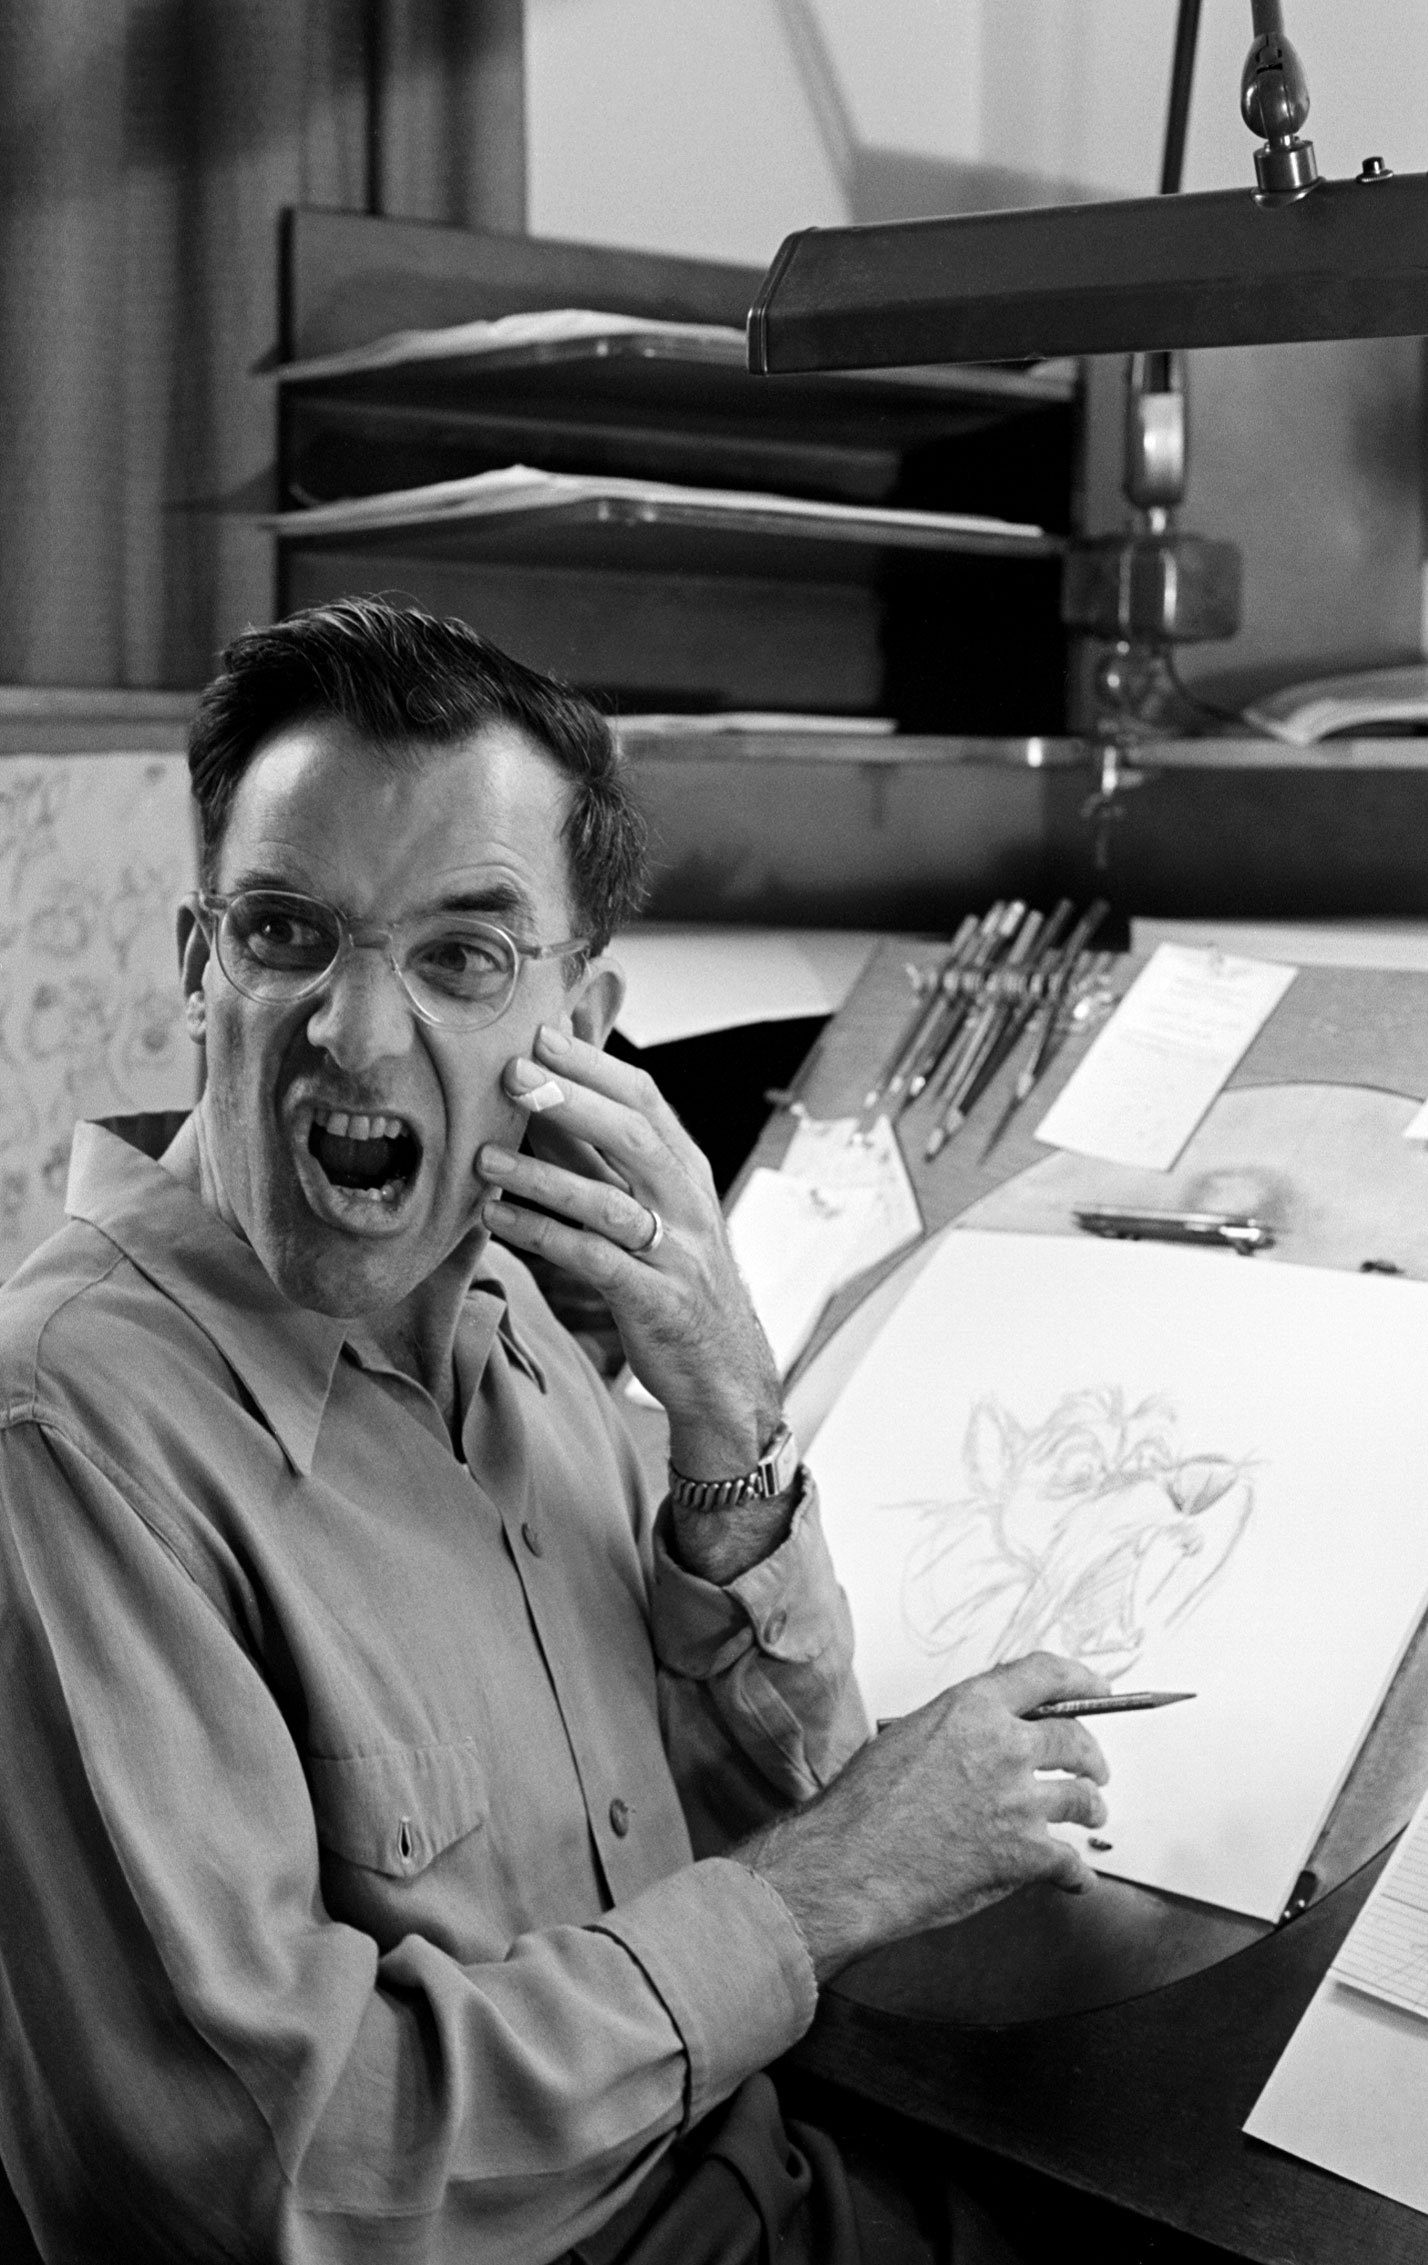 A Disney animator and a character he's drawn.